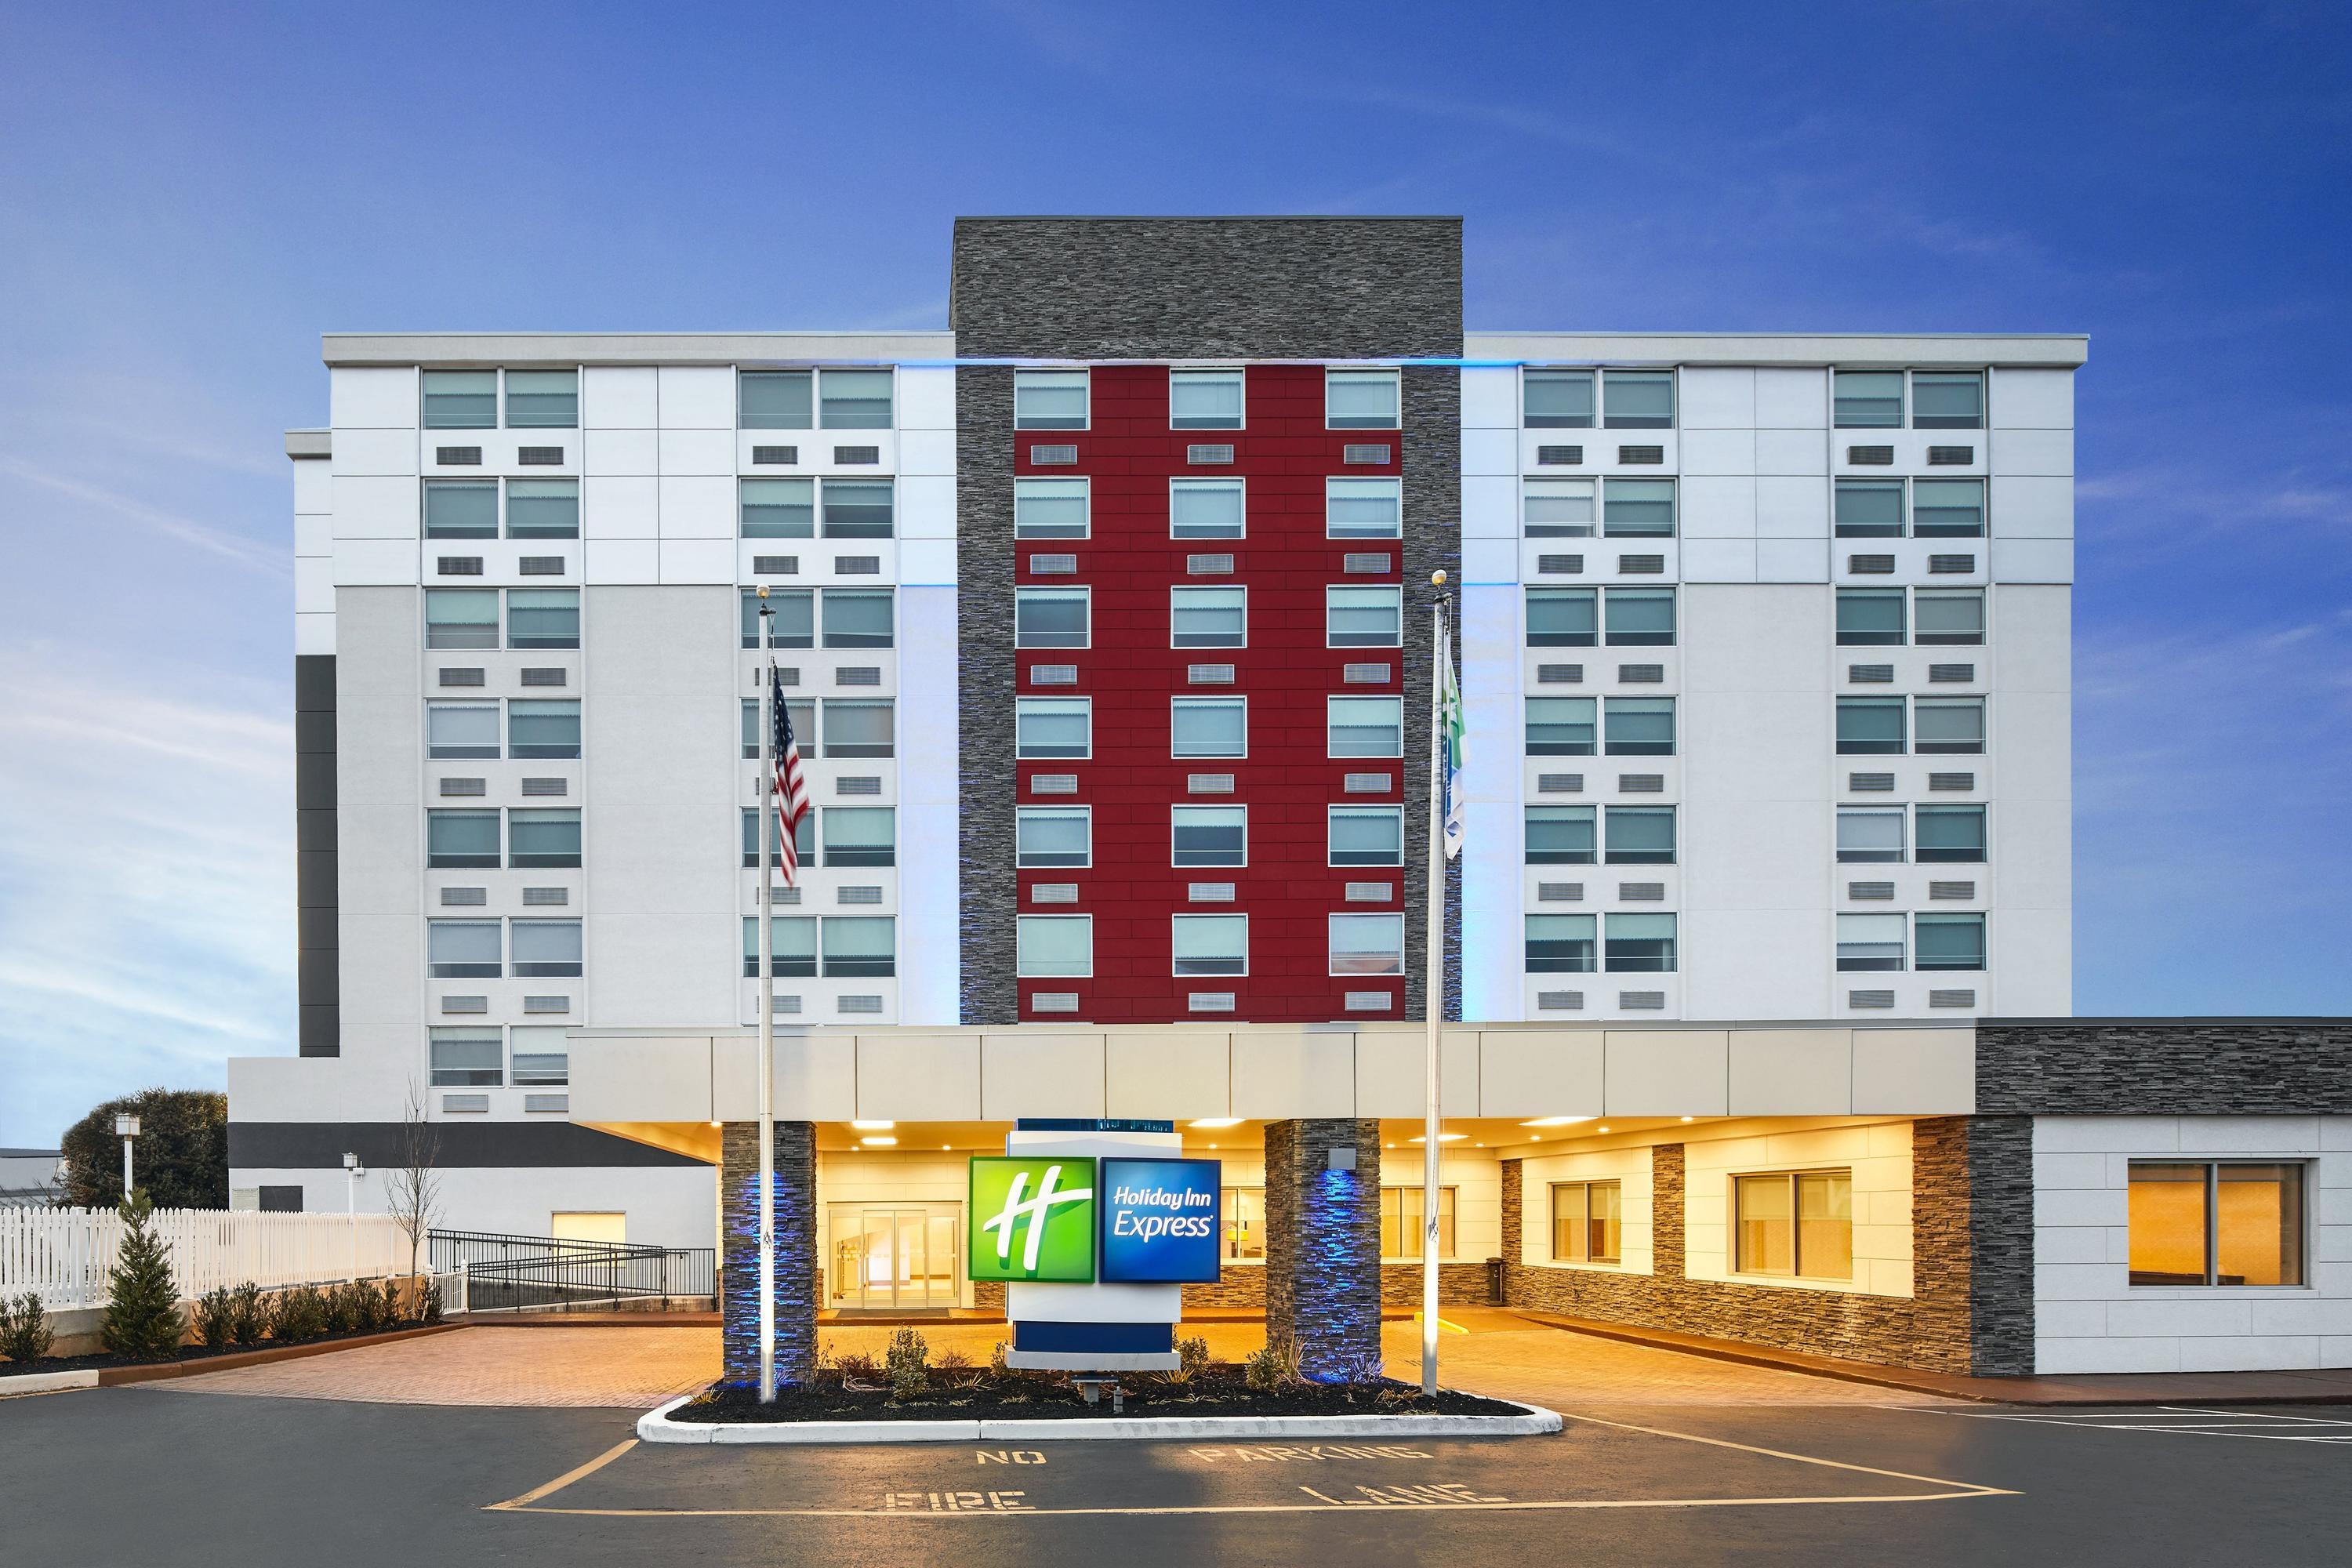 Home2 Suites by Hilton Richmond- First Class Richmond, IN Hotels- GDS  Reservation Codes: Travel Weekly